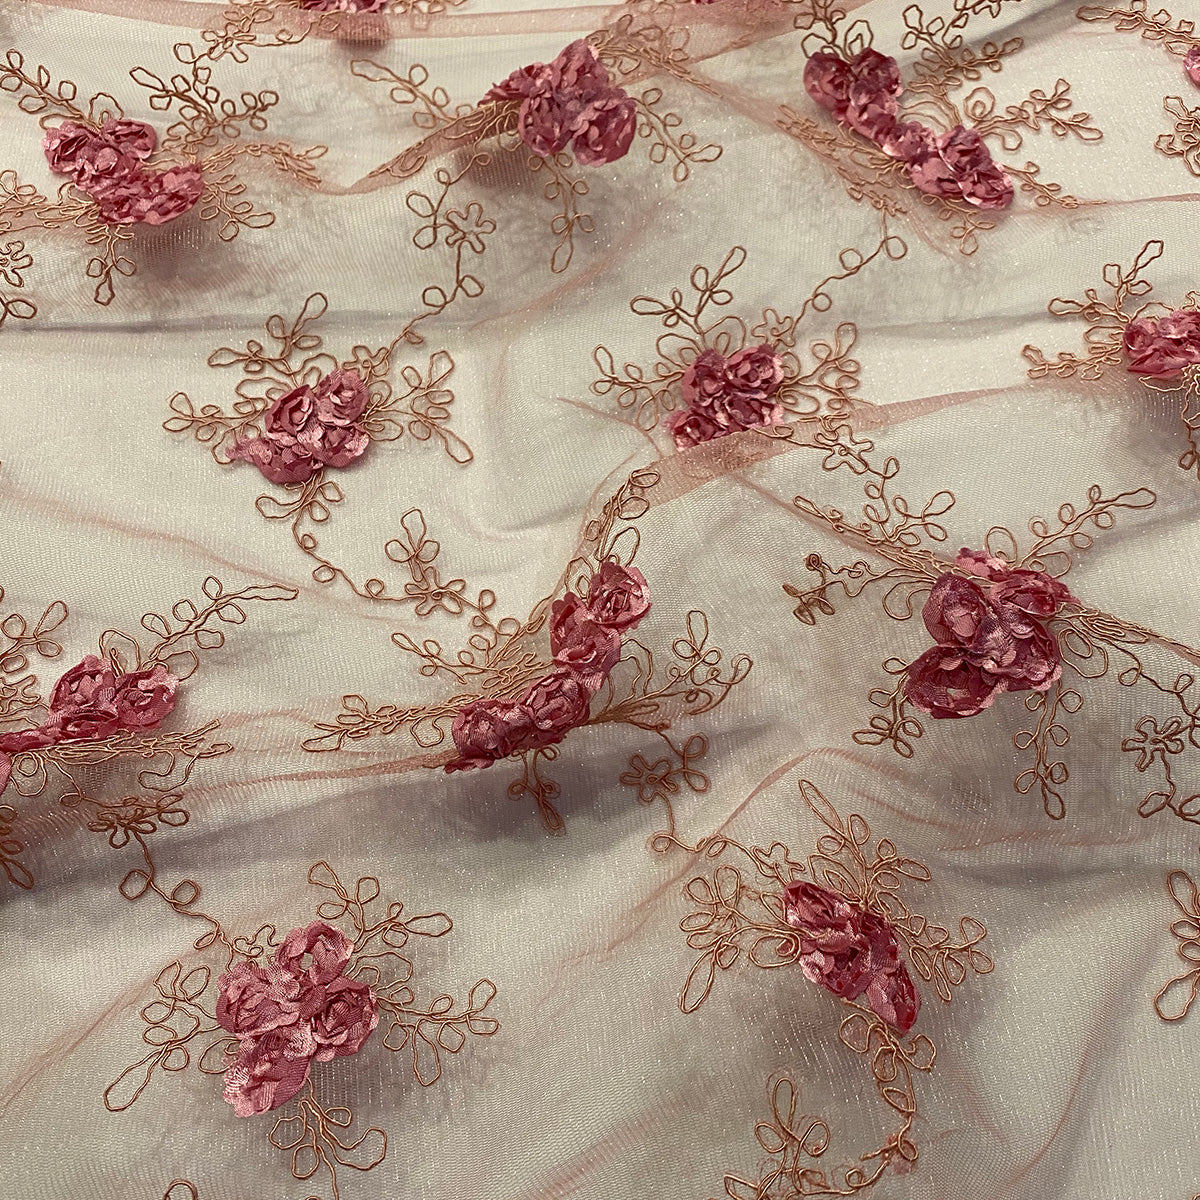 Premium Rose Embroidered Organza Lace Floral Fabric- By the Yard